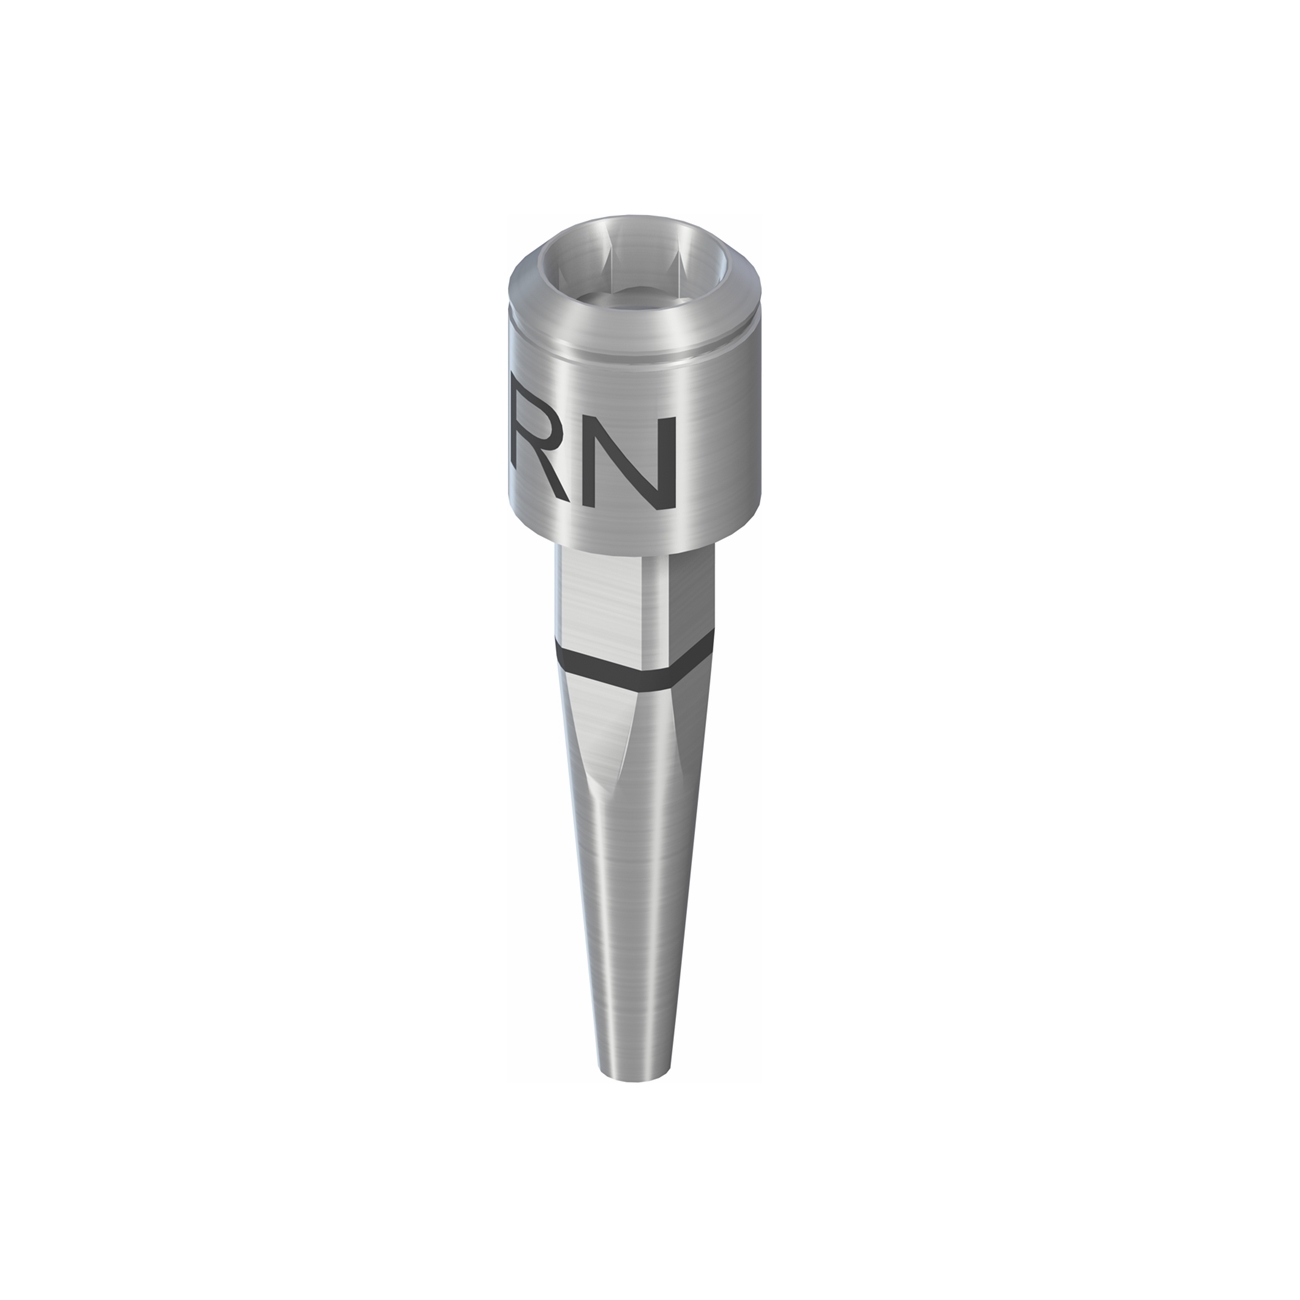 RN Repositionable Implant Analog